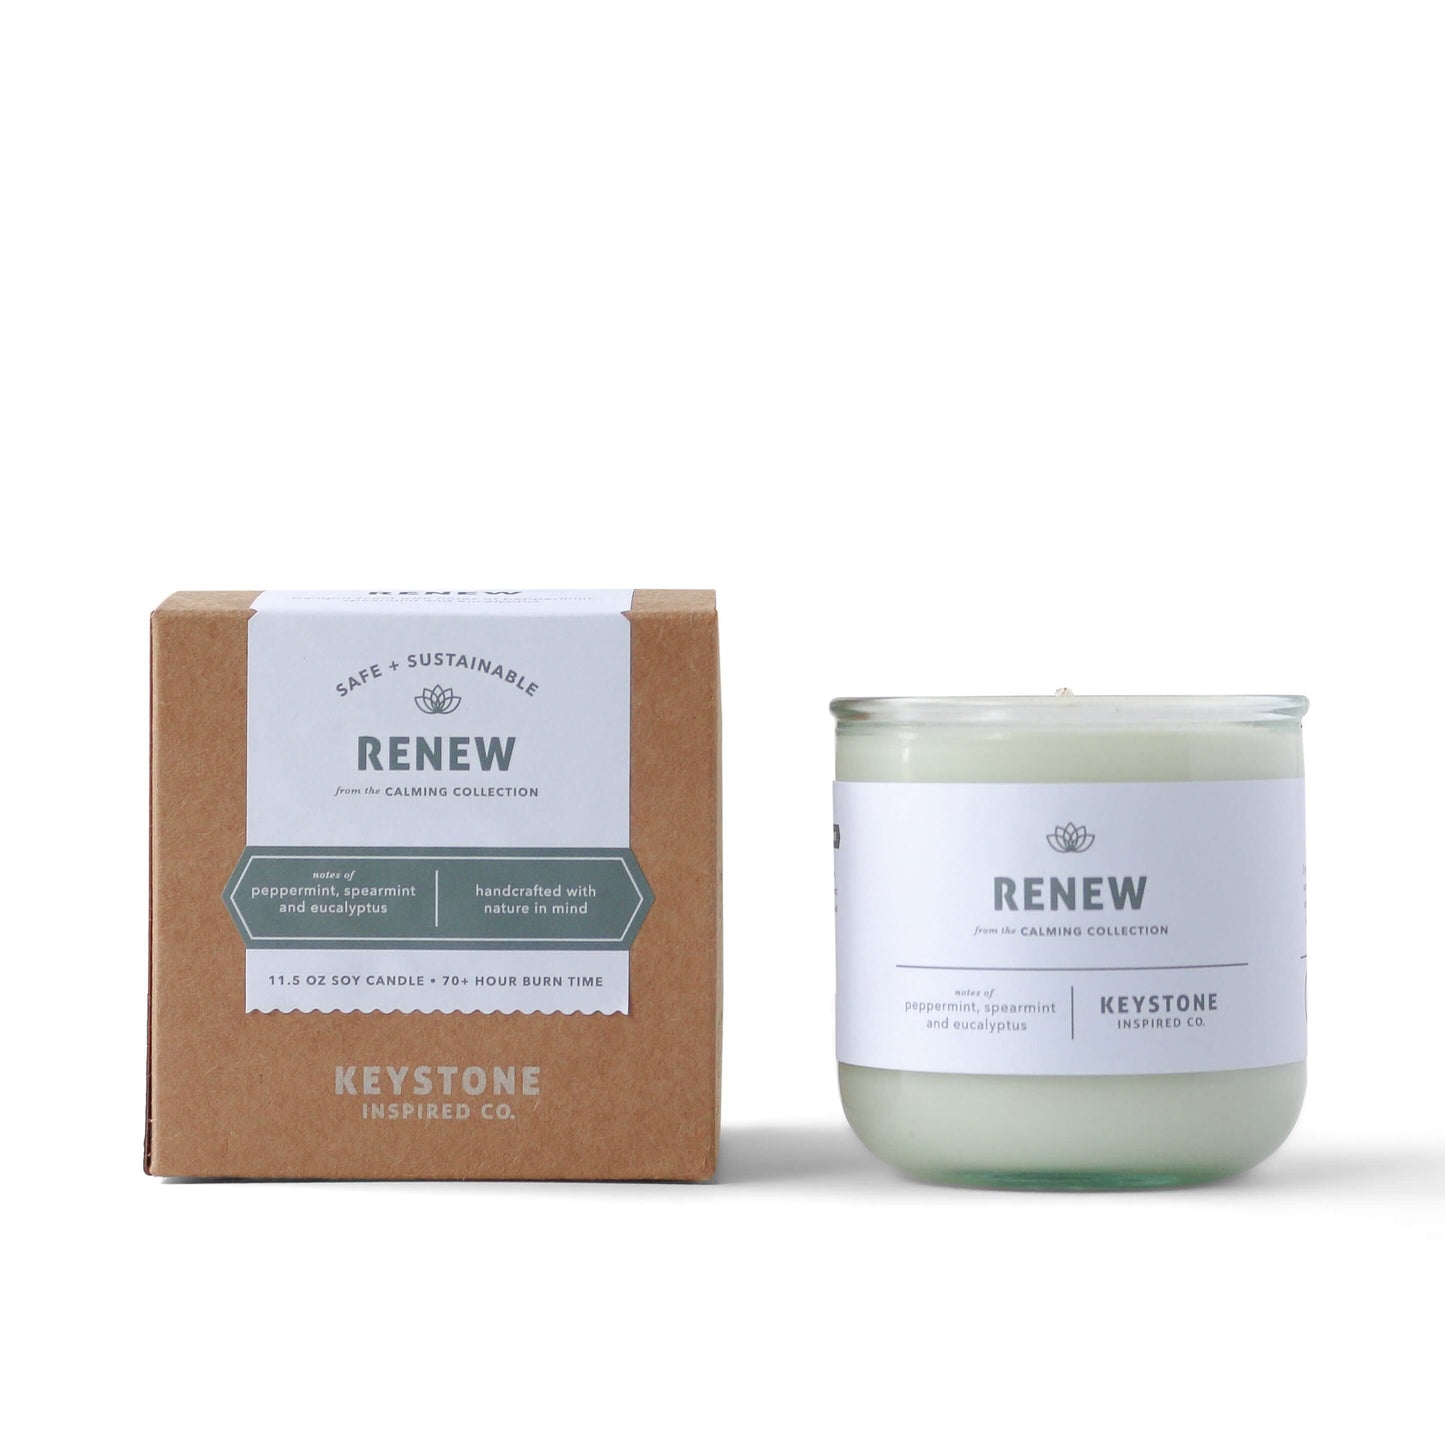 Renew | Calming Collection | 11.5 oz glass